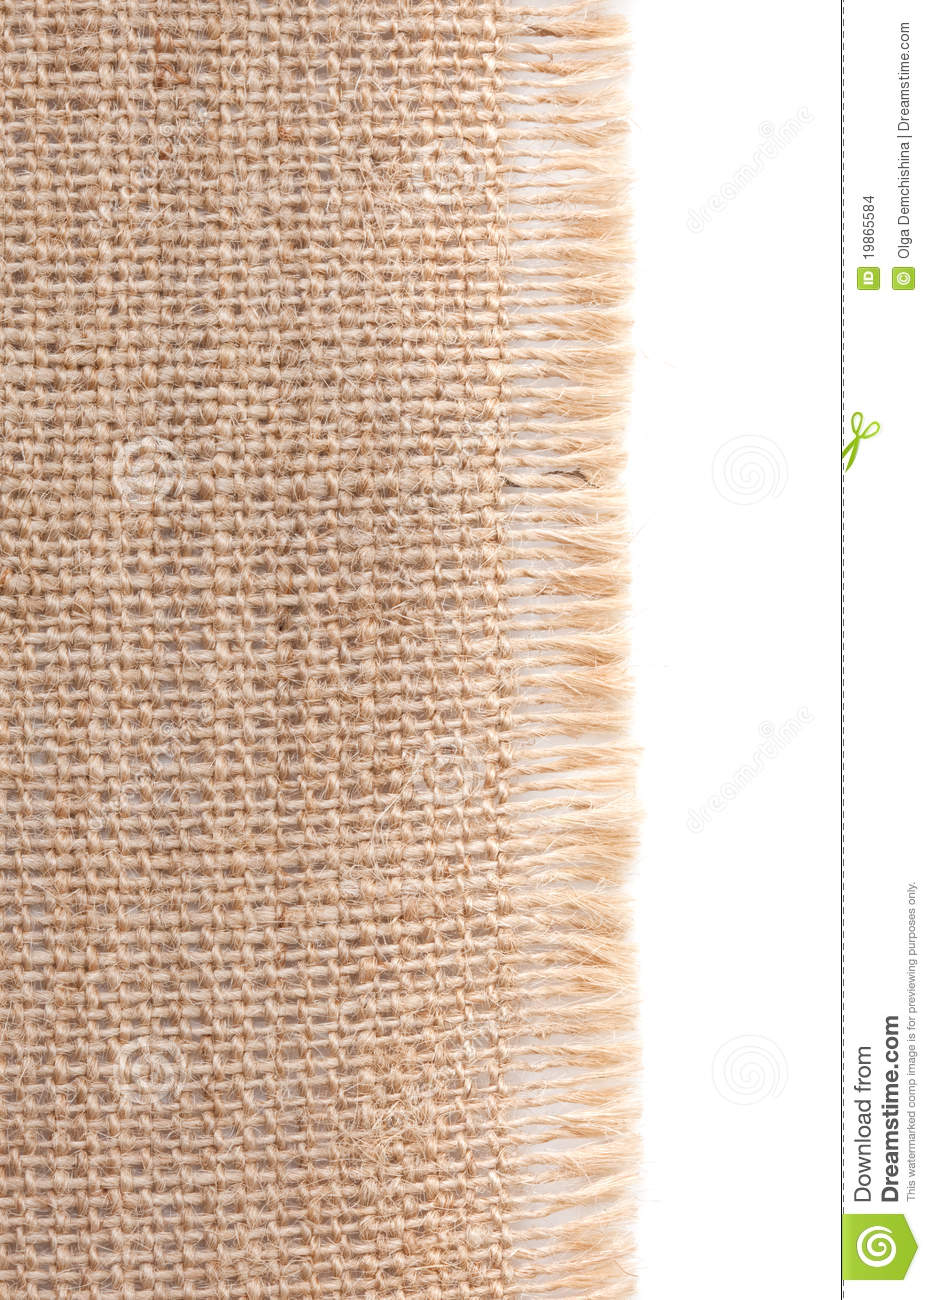 Burlap With Frayed Edges Stock Images.